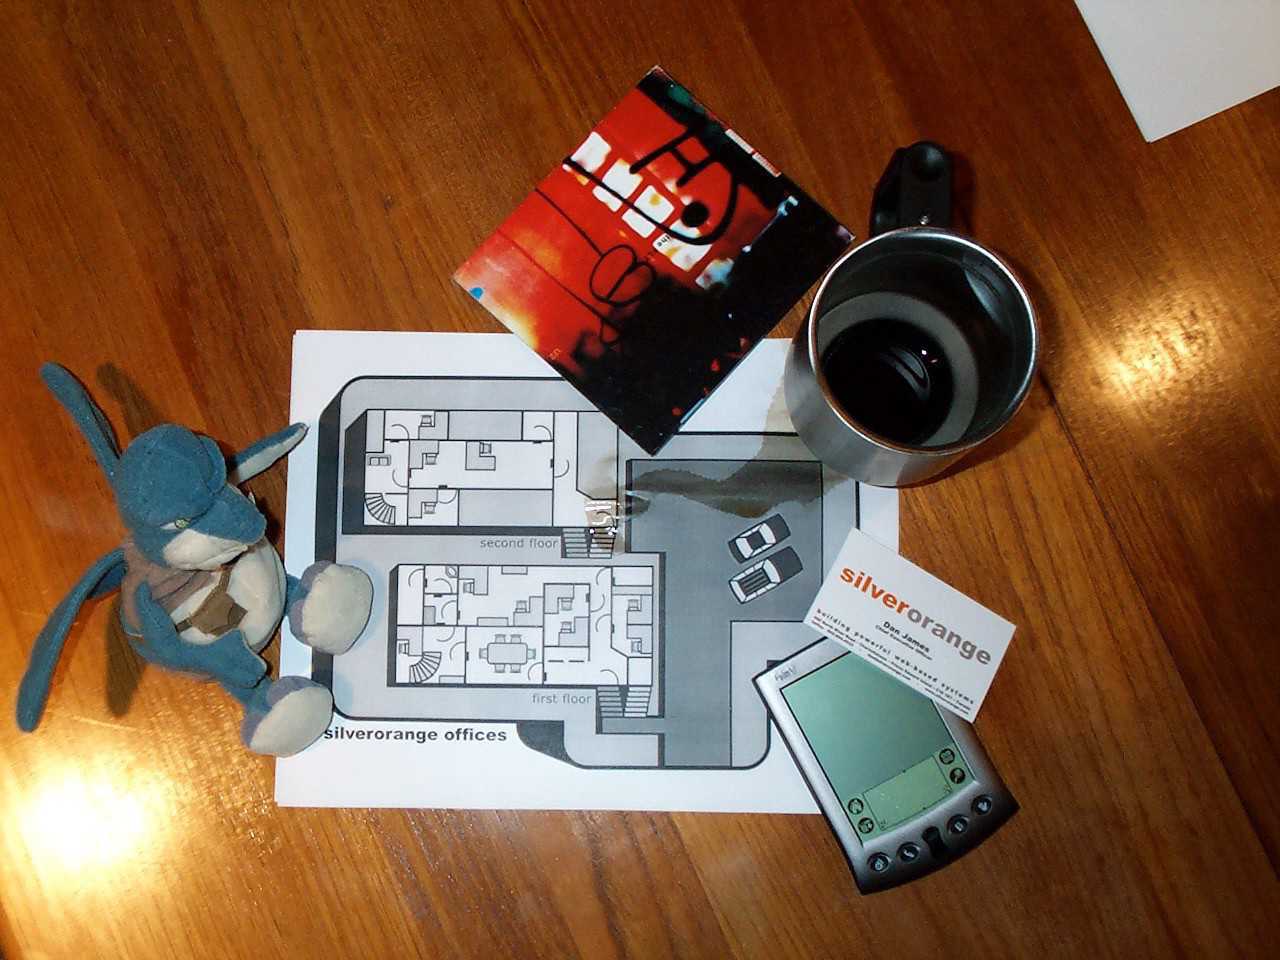 Pile of items on wooden table including Star Wars toy, CD case, coffee mug, business card, office map, and Palm Pilot